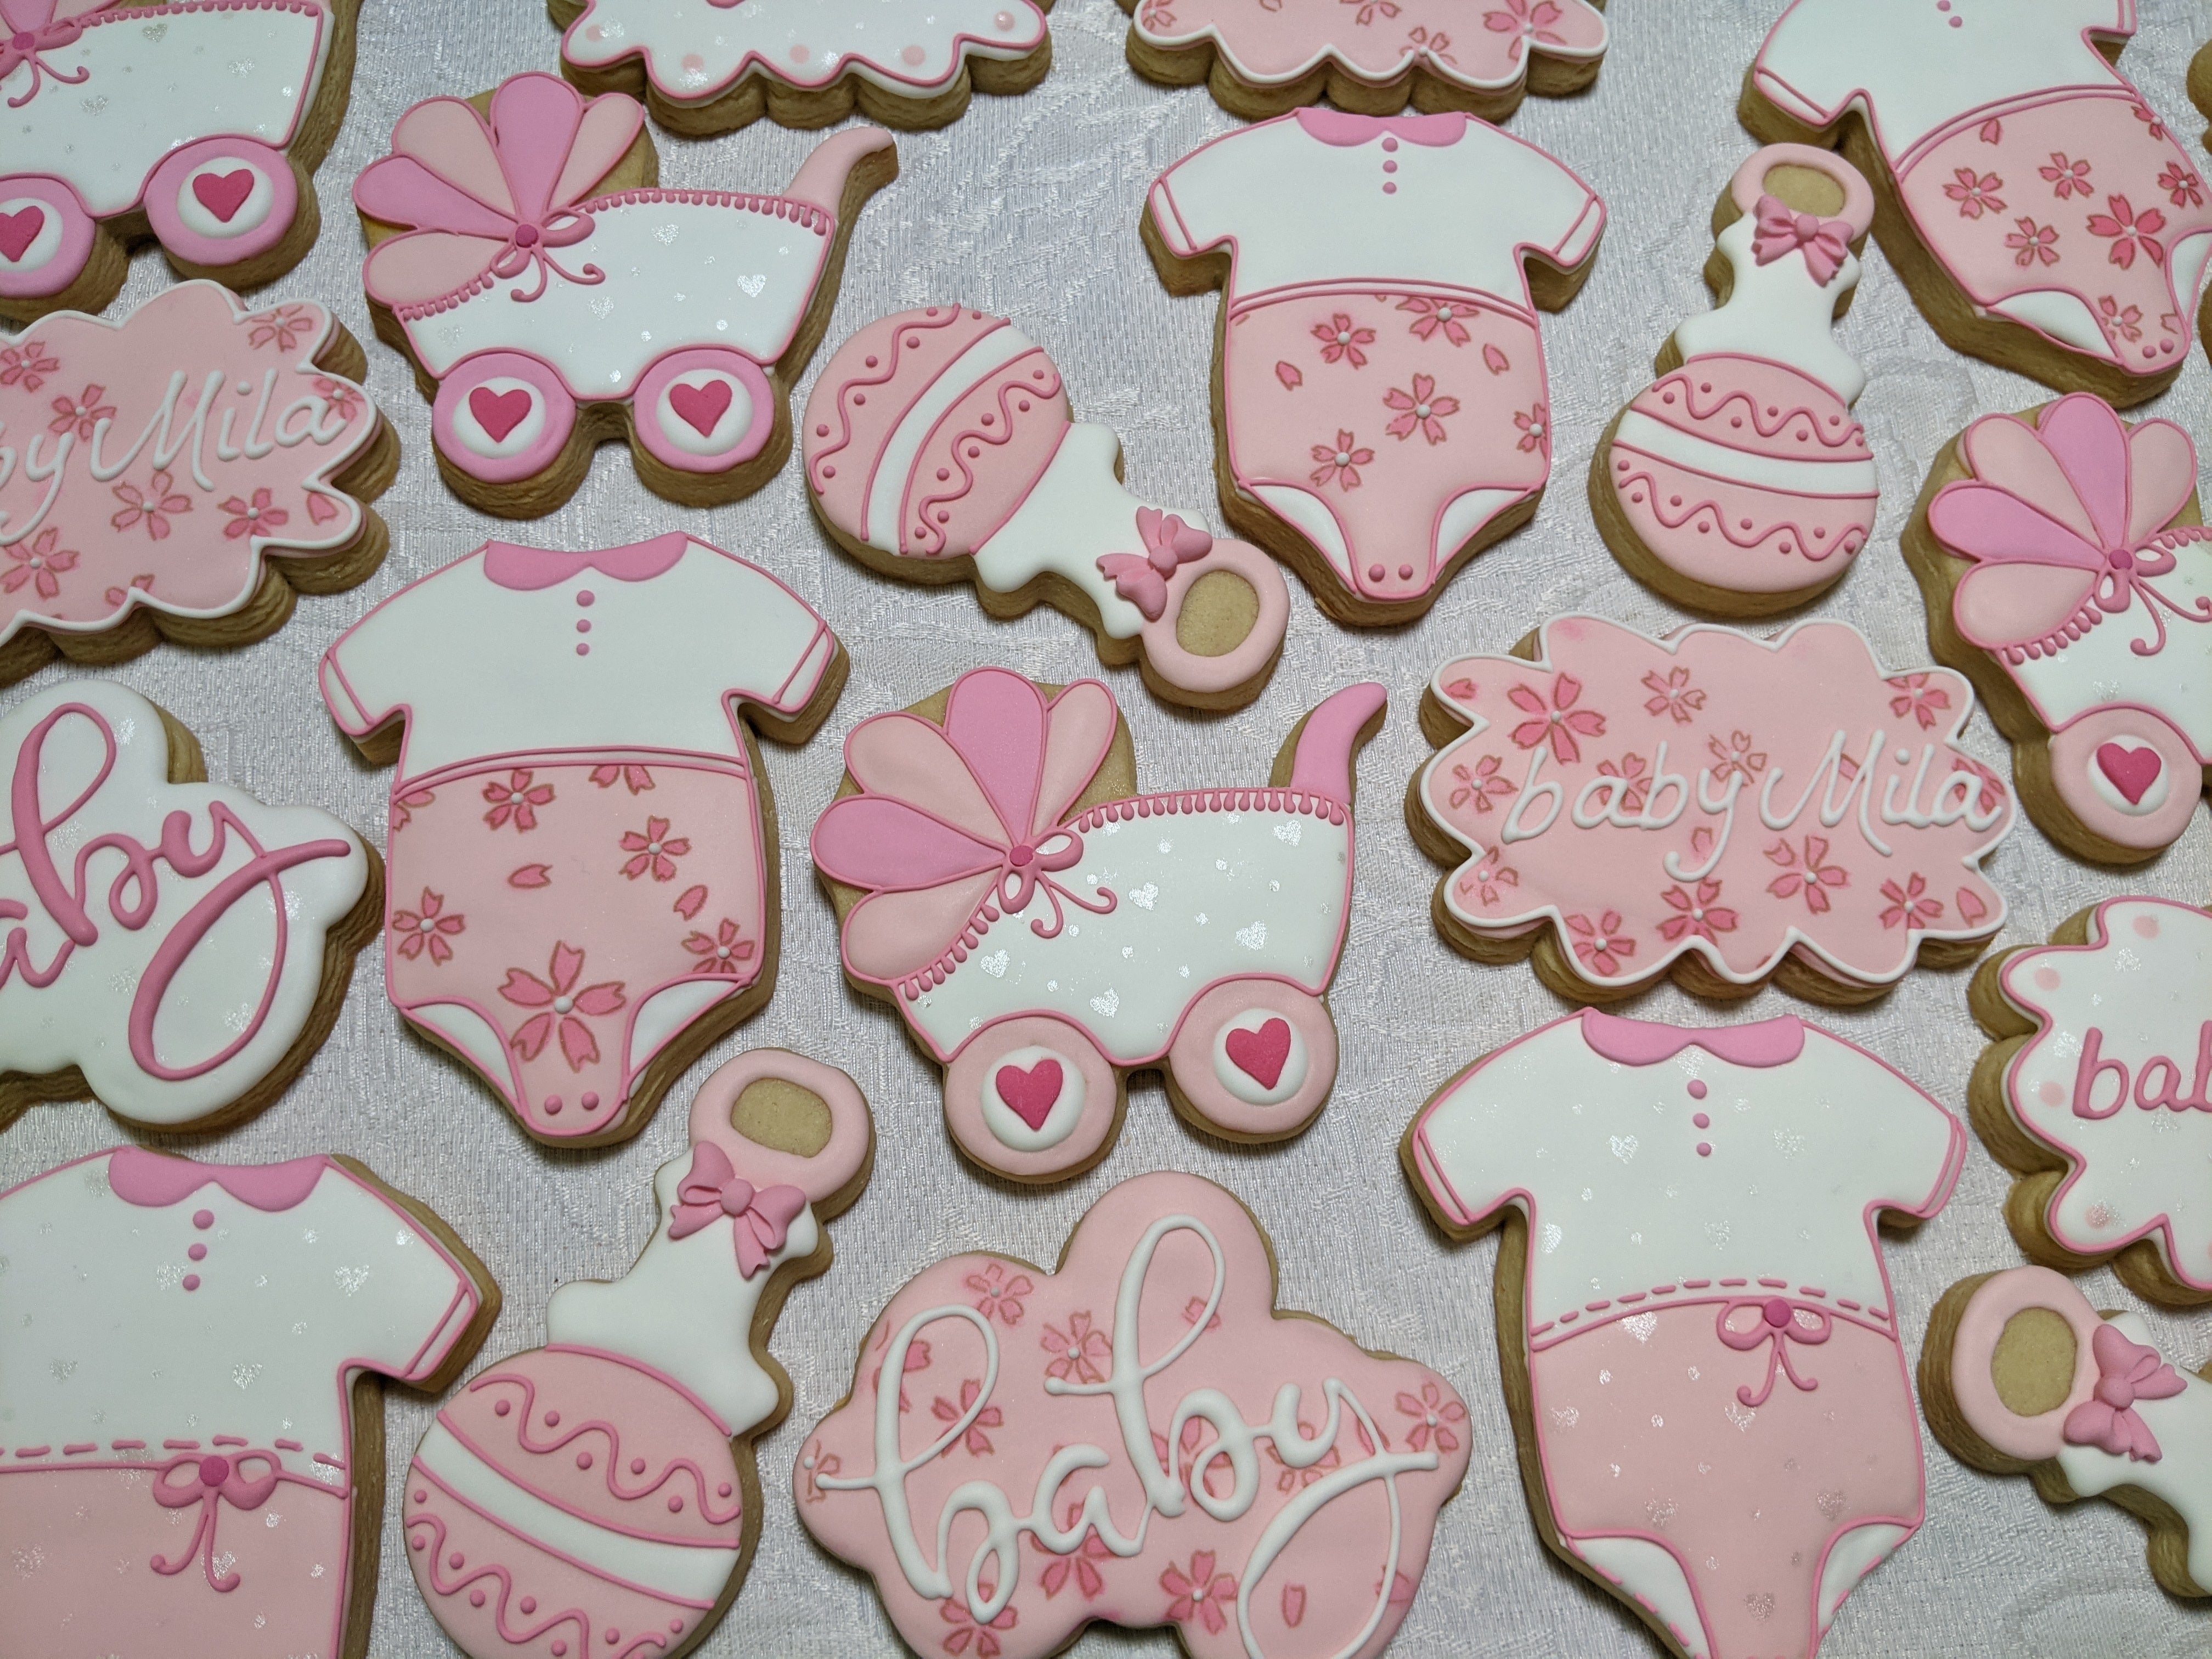 24 Welcome Baby Girl Baby Shower Decorated Cookies